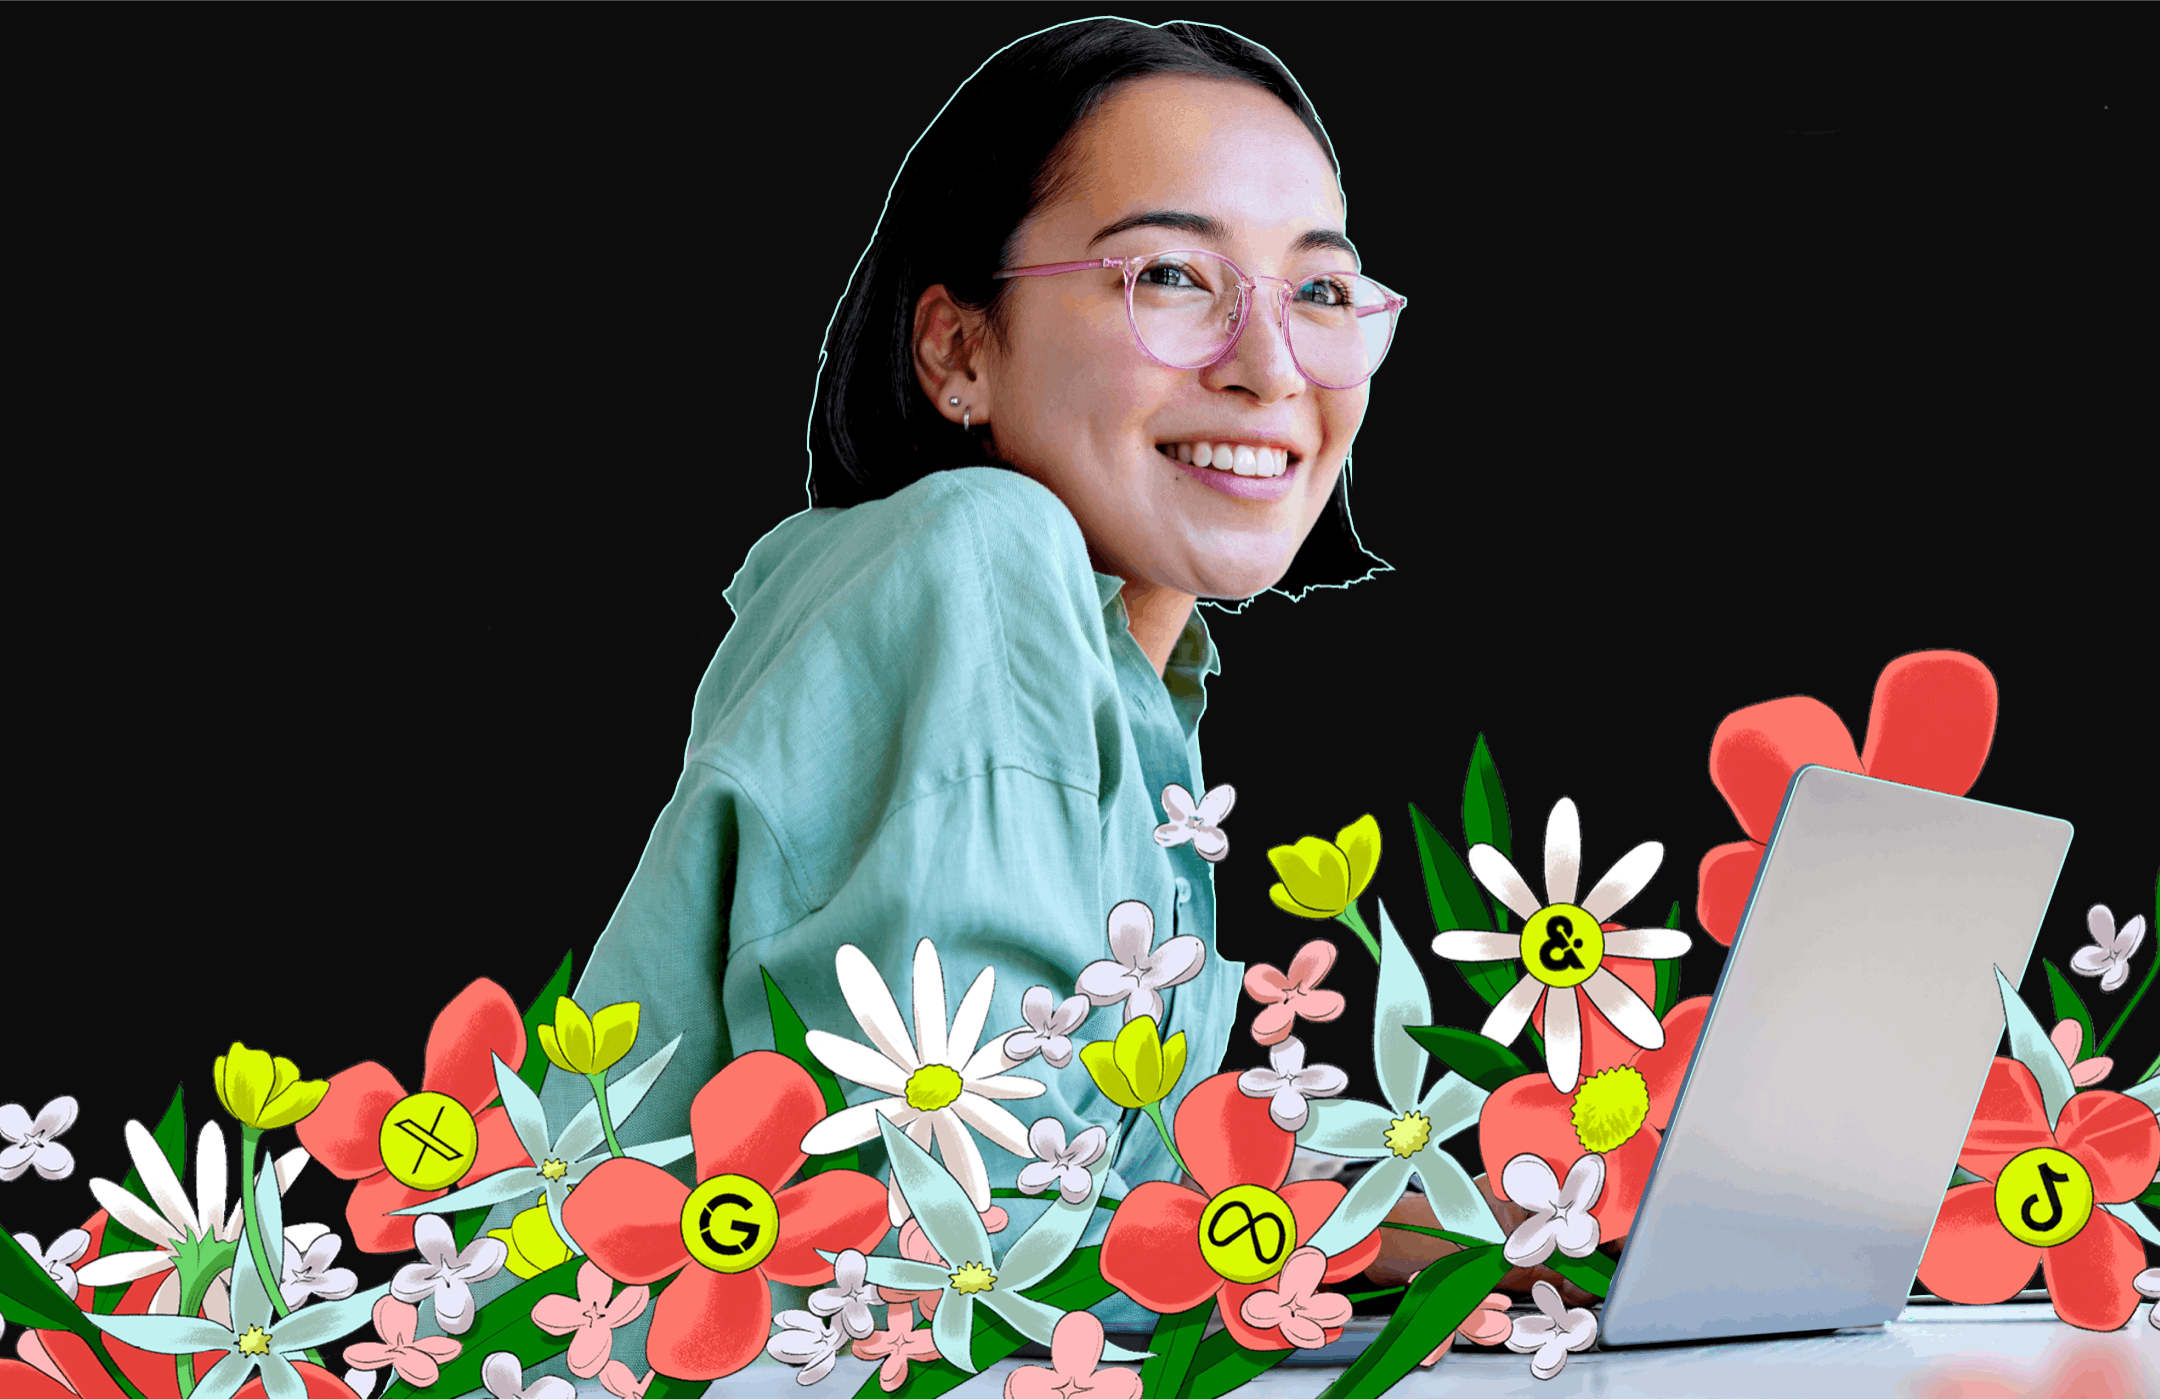 Promo image for Amperity for Paid Media showing a woman at her desk with a computer with an illustrated bed of flowers that contain paid media company logos